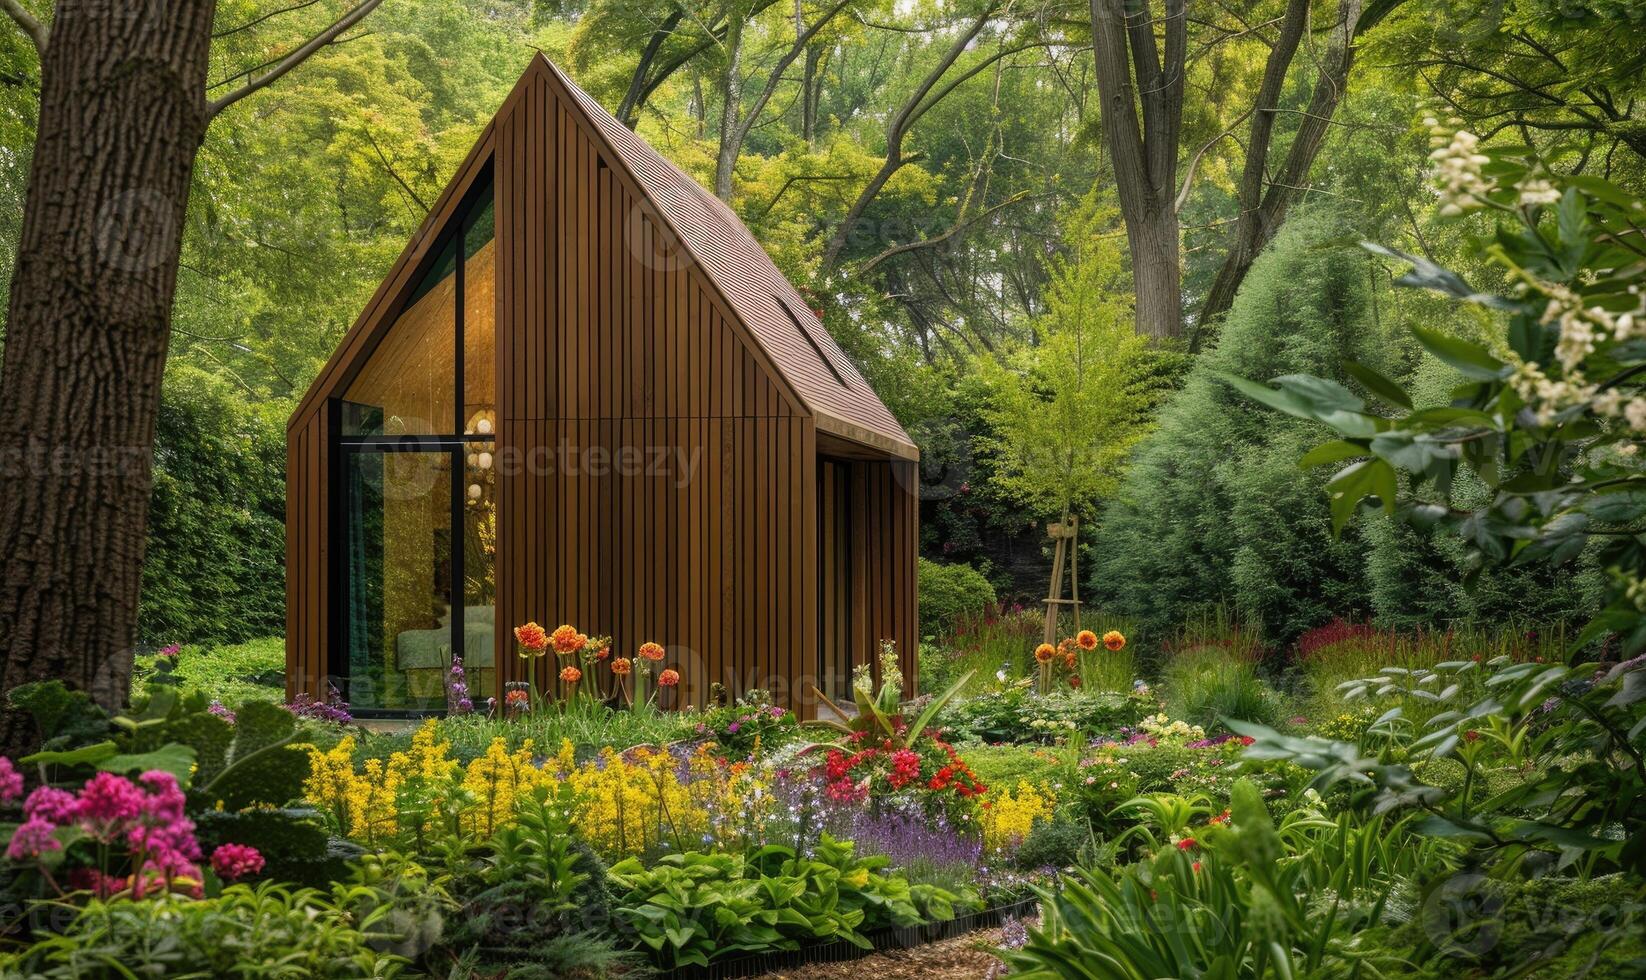 A minimalist modern wooden cabin surrounded by a variety of spring flowers and lush green foliage in a tranquil garden setting photo